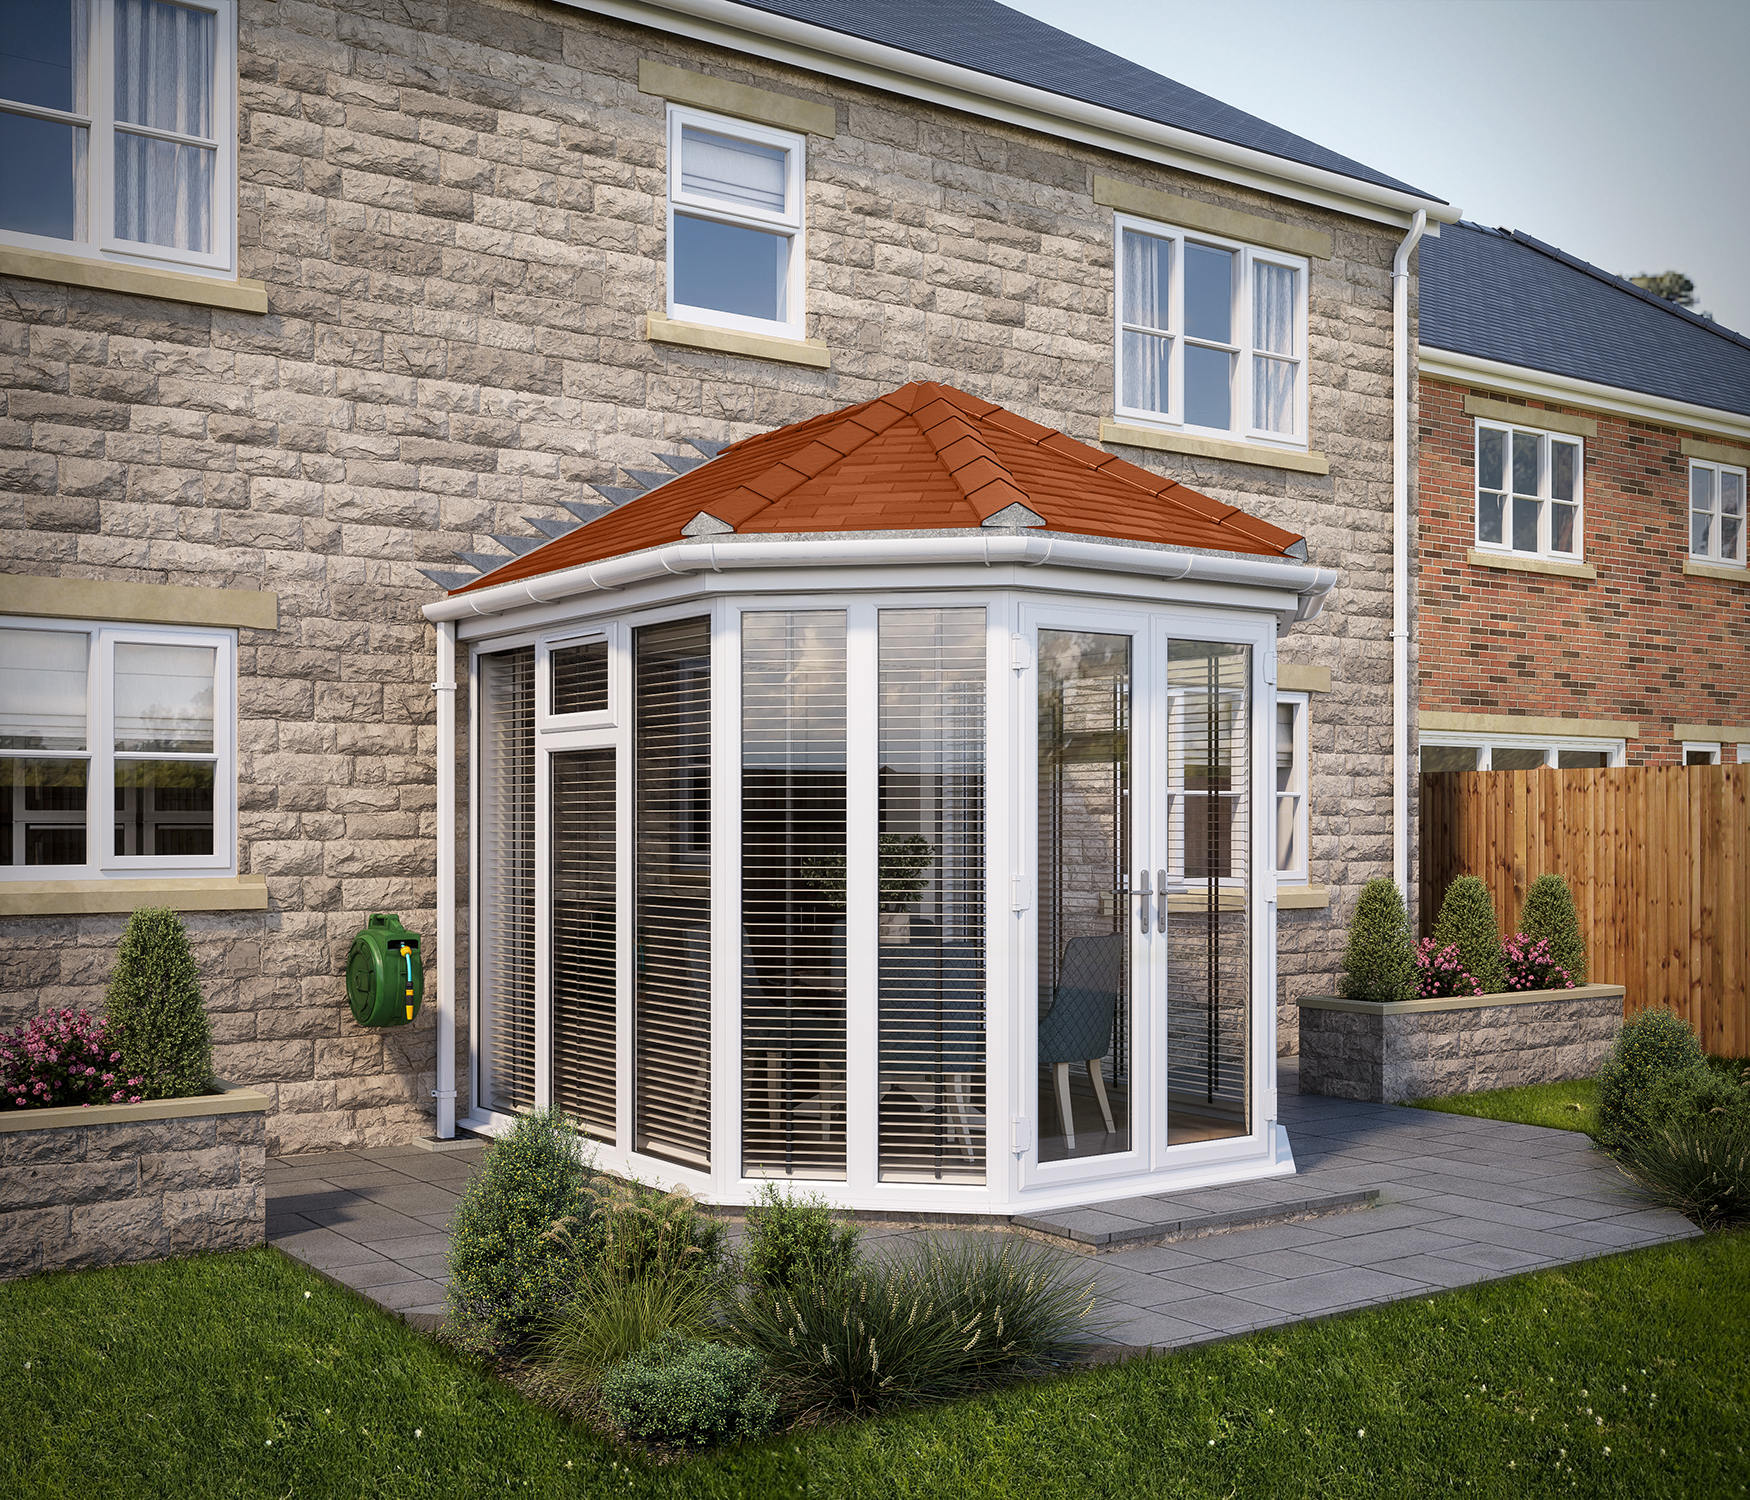 Image of SOLid Roof Full Height Victorian Conservatory White Frames with Rustic Terracotta Tiles - 13 x 13ft